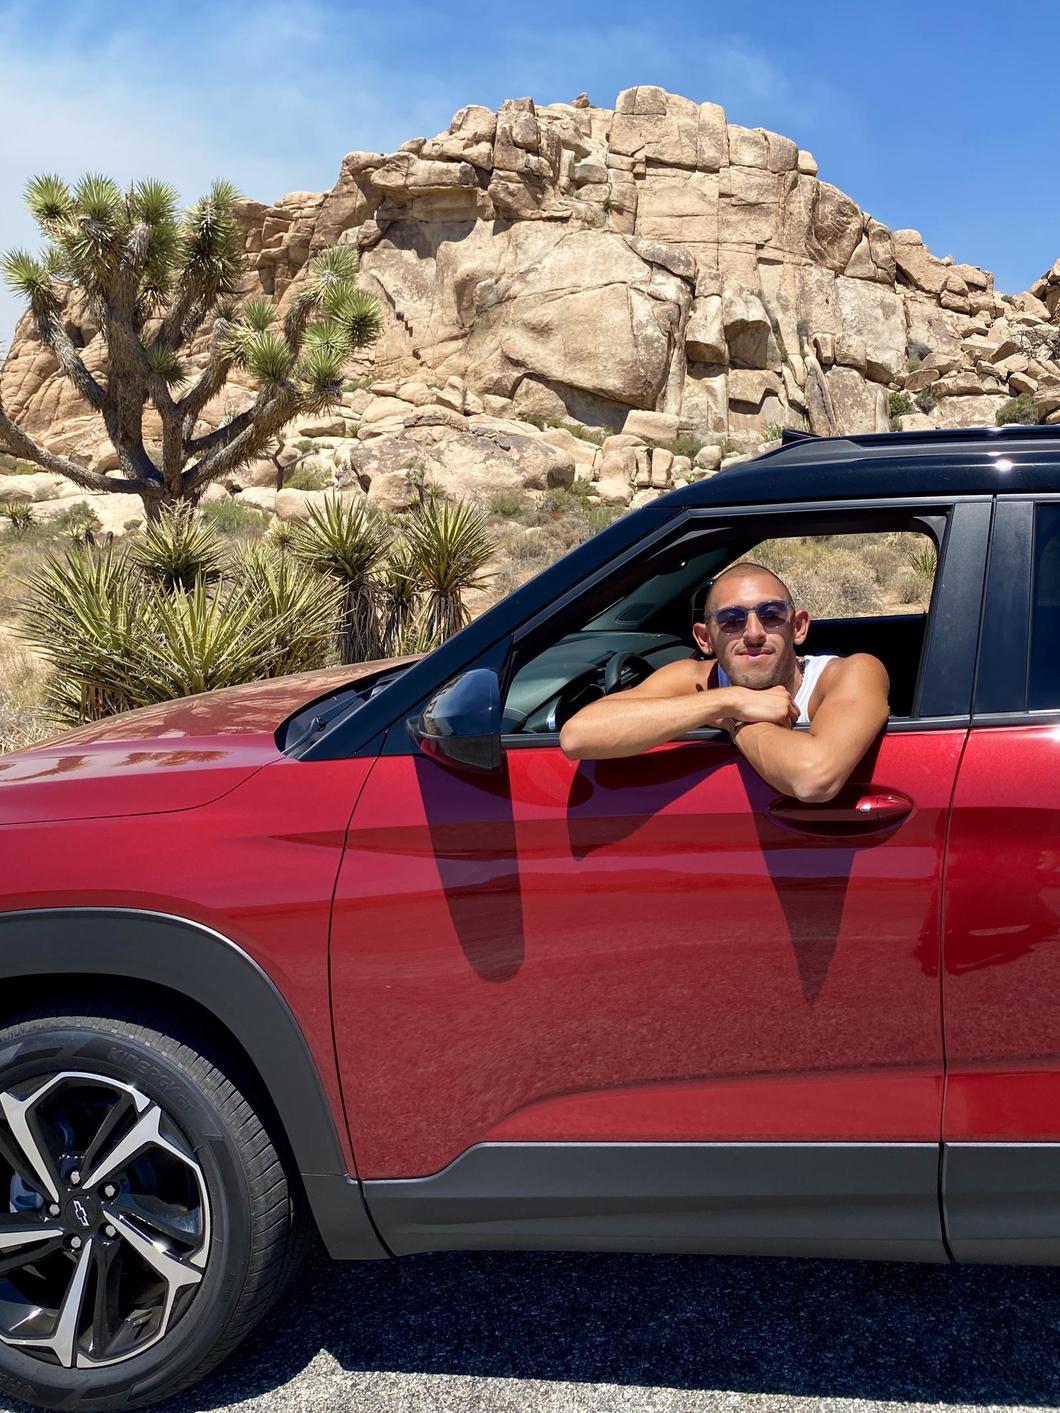 For my 29th birthday last month, I was beyond lucky to have four of my closest friends fly into LA from New York for a road trip to Joshua Tree in Chevrolet’s 2021 Trailblazer.